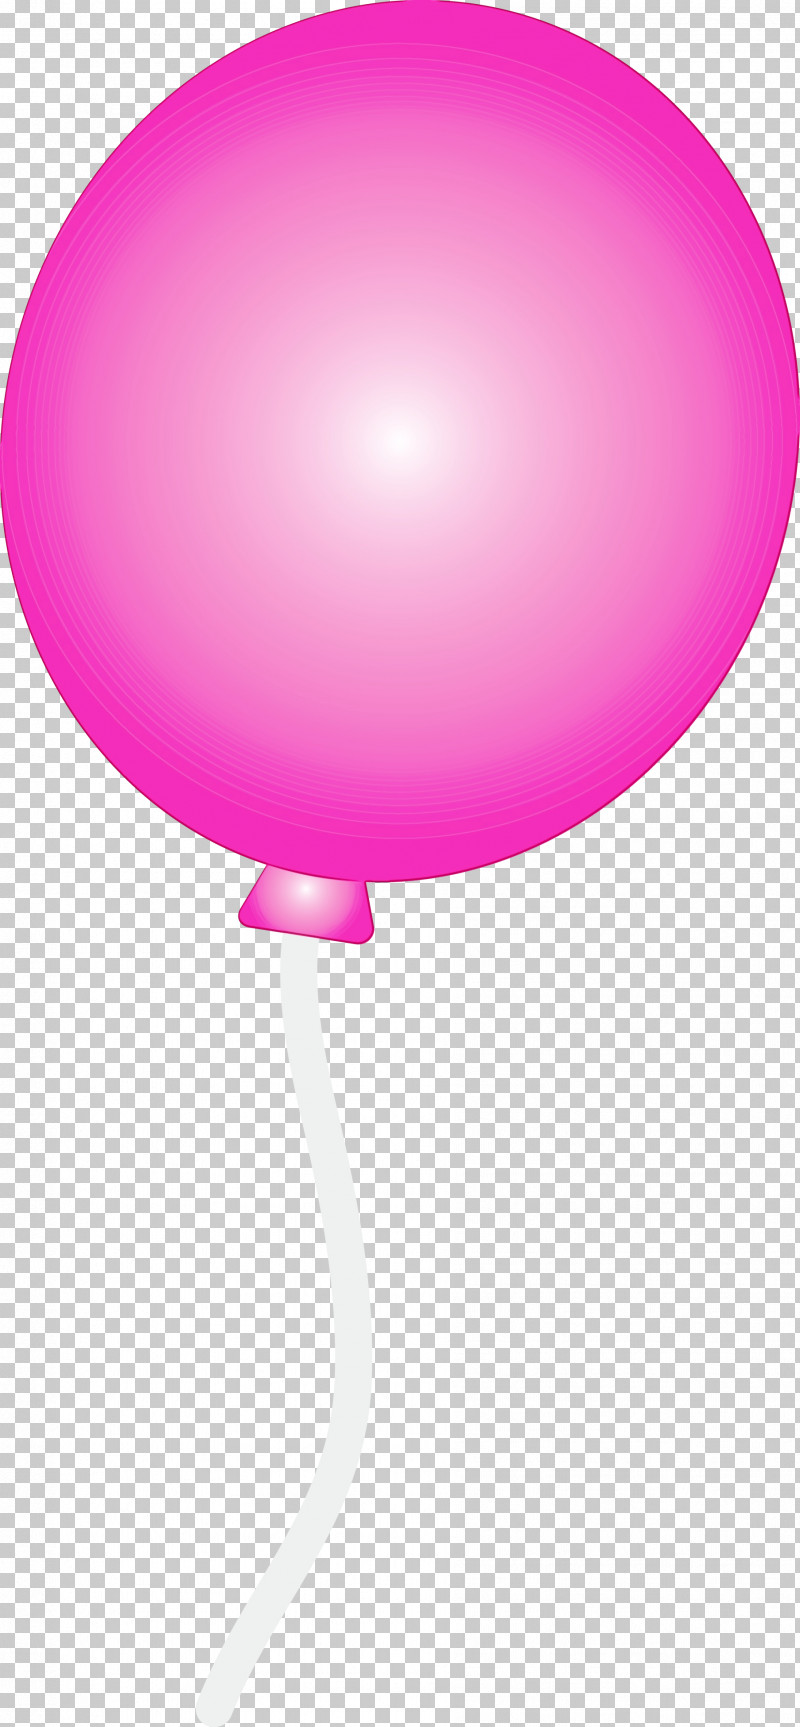 Balloon Pink Magenta Party Supply Material Property PNG, Clipart, Balloon, Magenta, Material Property, Paint, Party Supply Free PNG Download